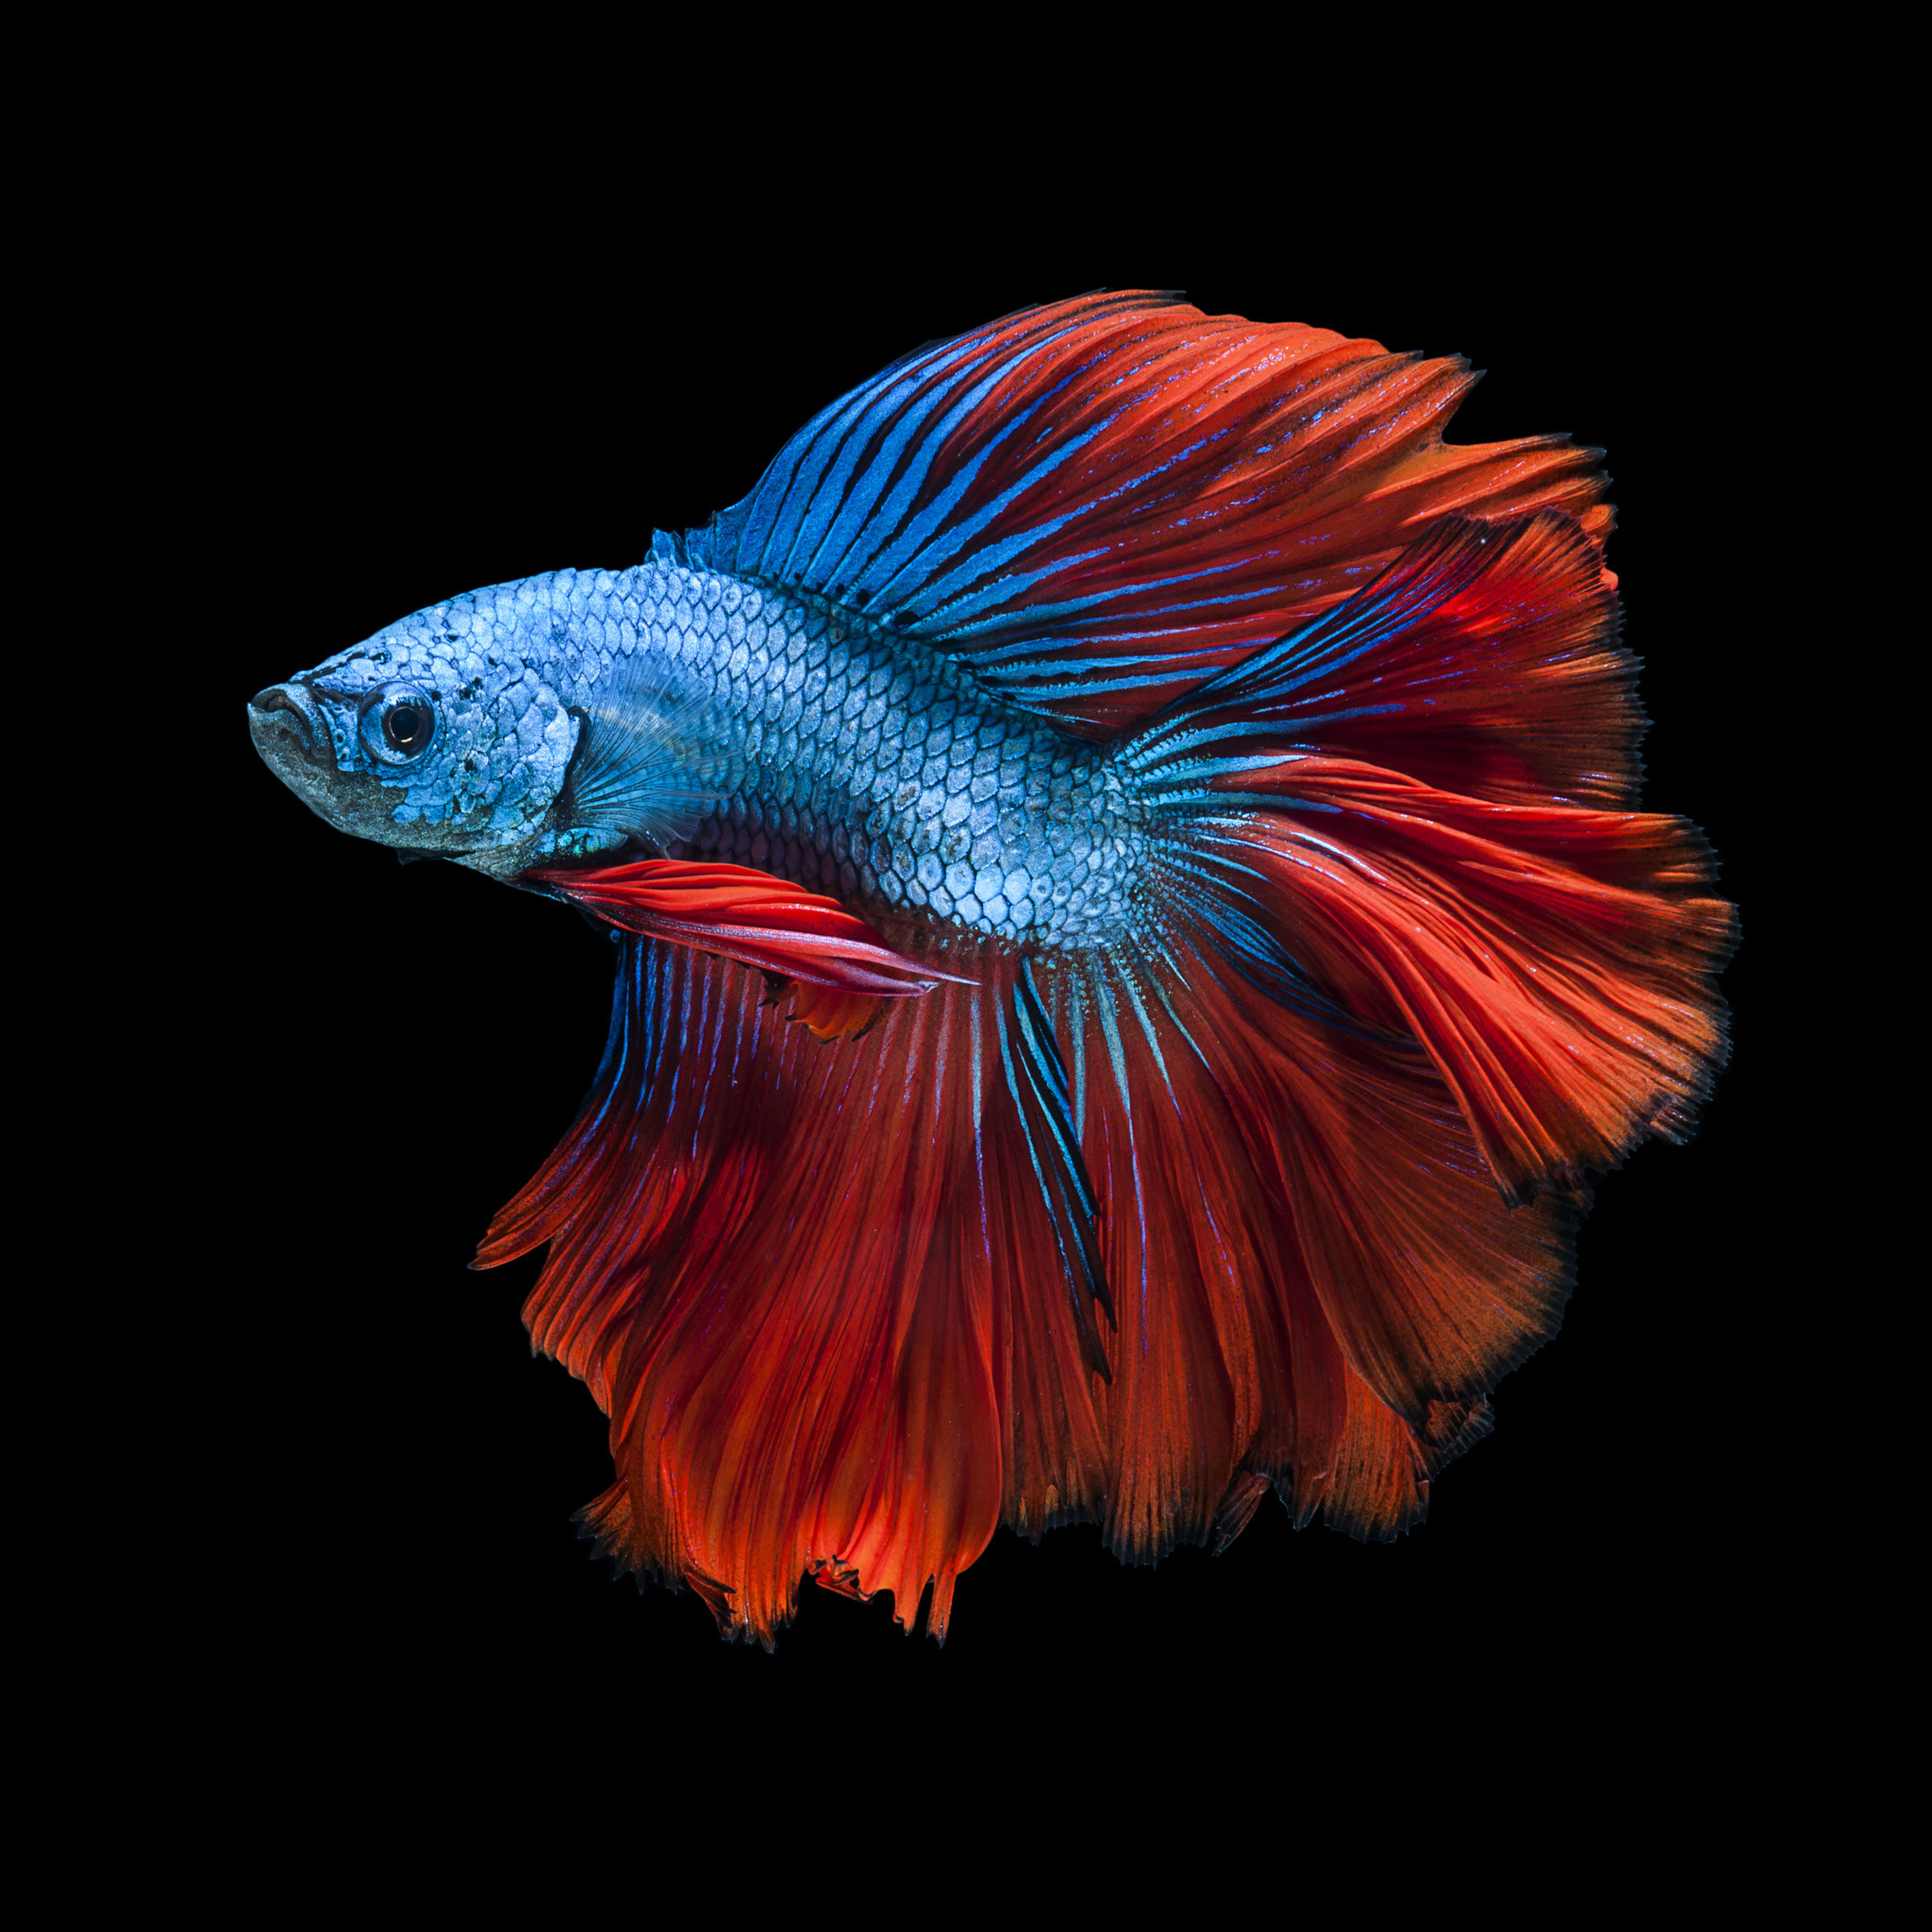 2048x2048 Capture the moving moment of red-blue siamese fighting fish by Jirawat  Plekhongthu on 500px